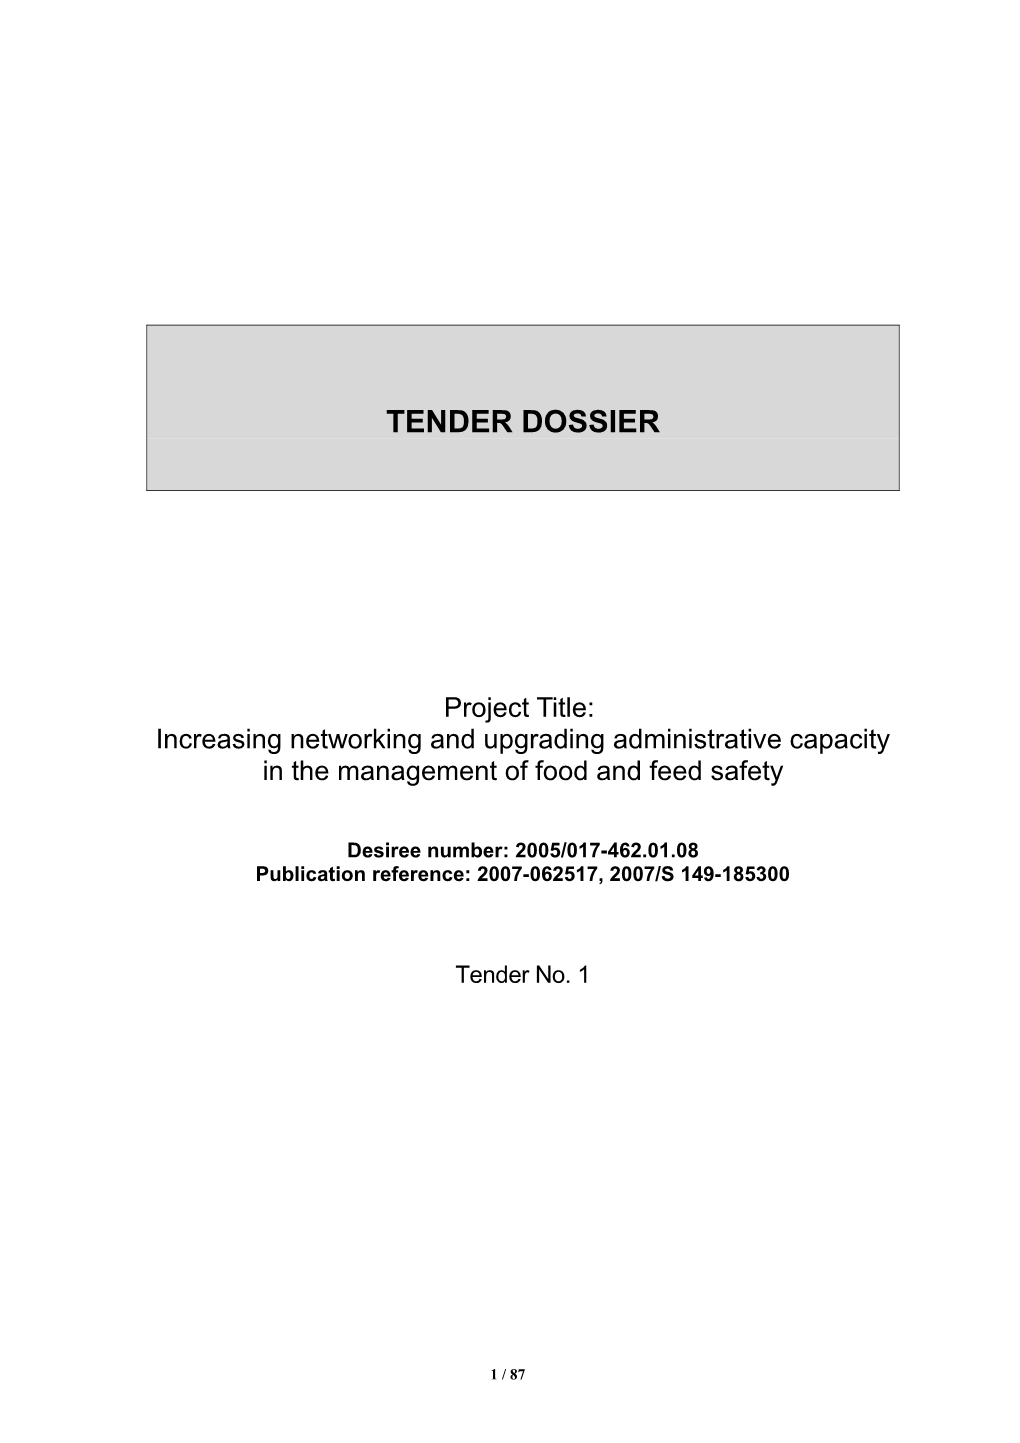 Subject: Invitation to Tender No.1 for a Project Financed from Transition Facility